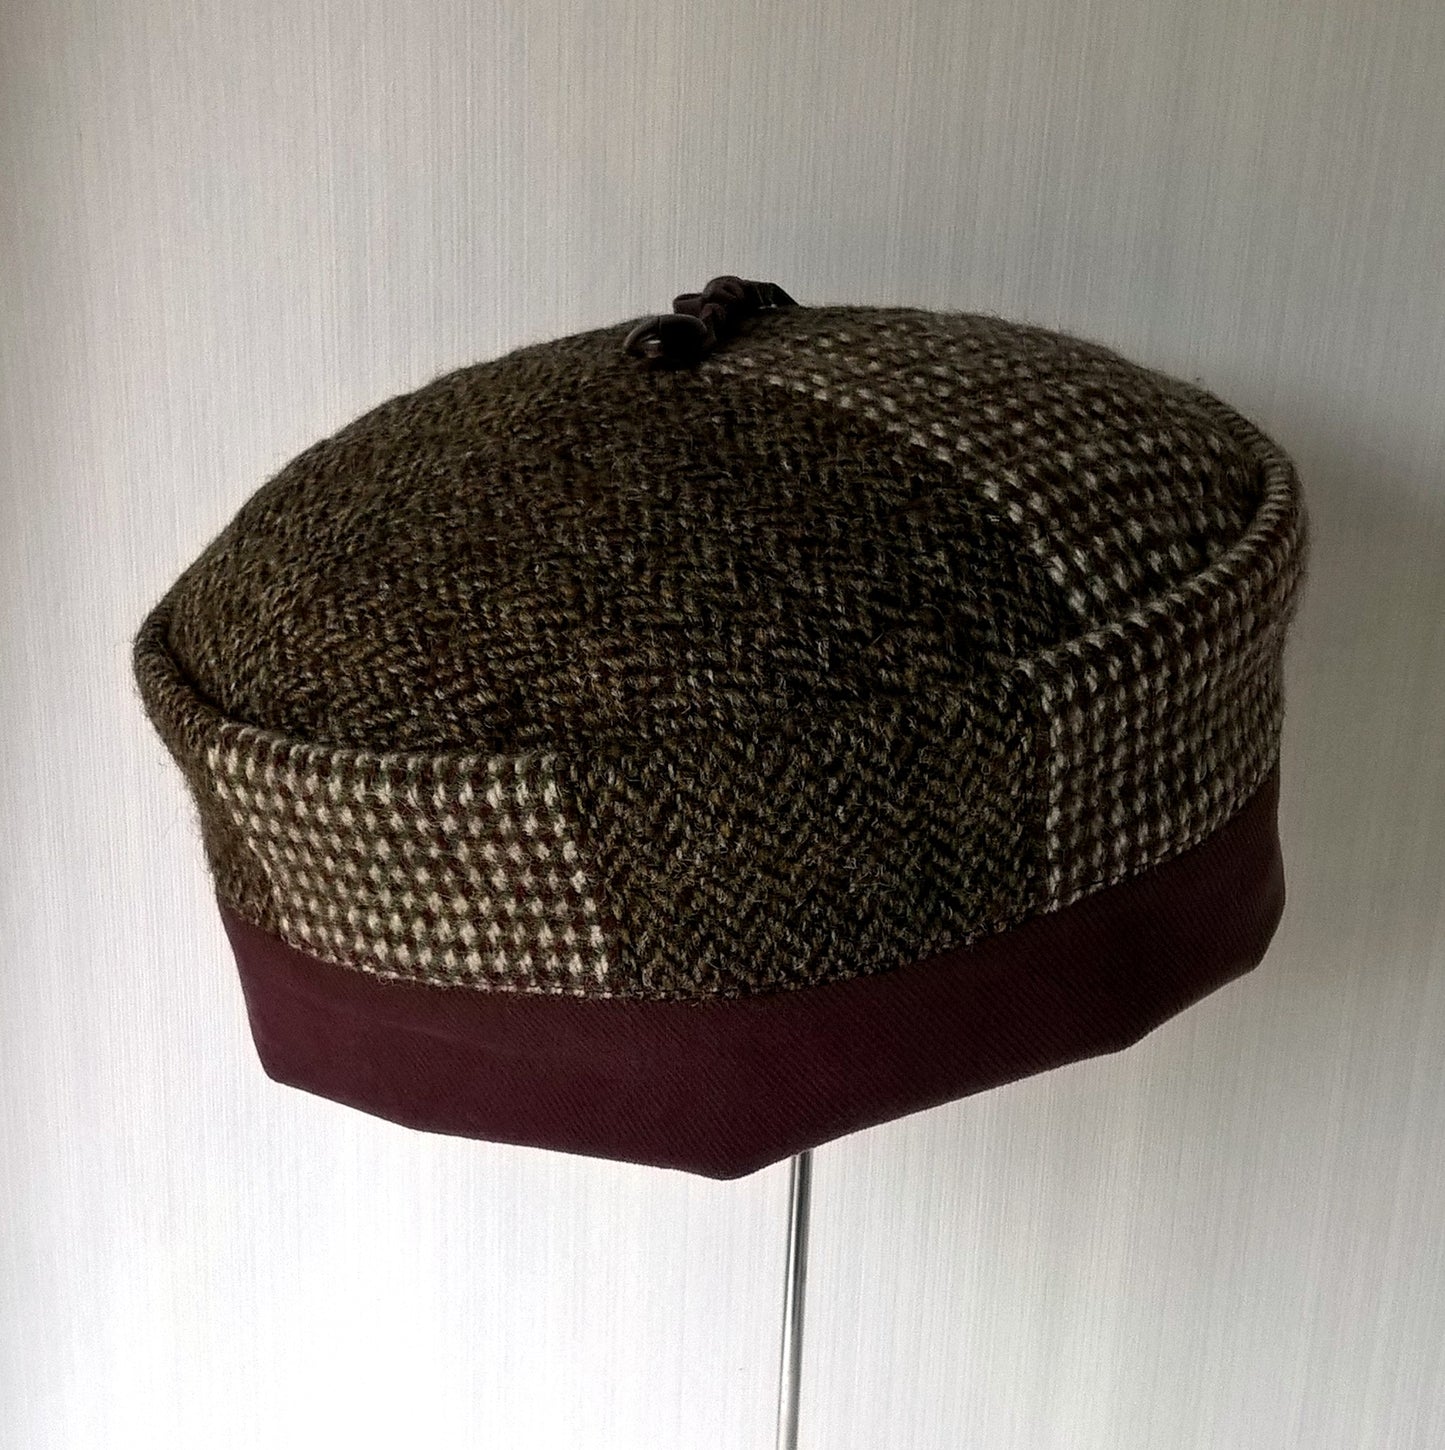 Wool smoking cap in mismatched tweed with removable leather tassel